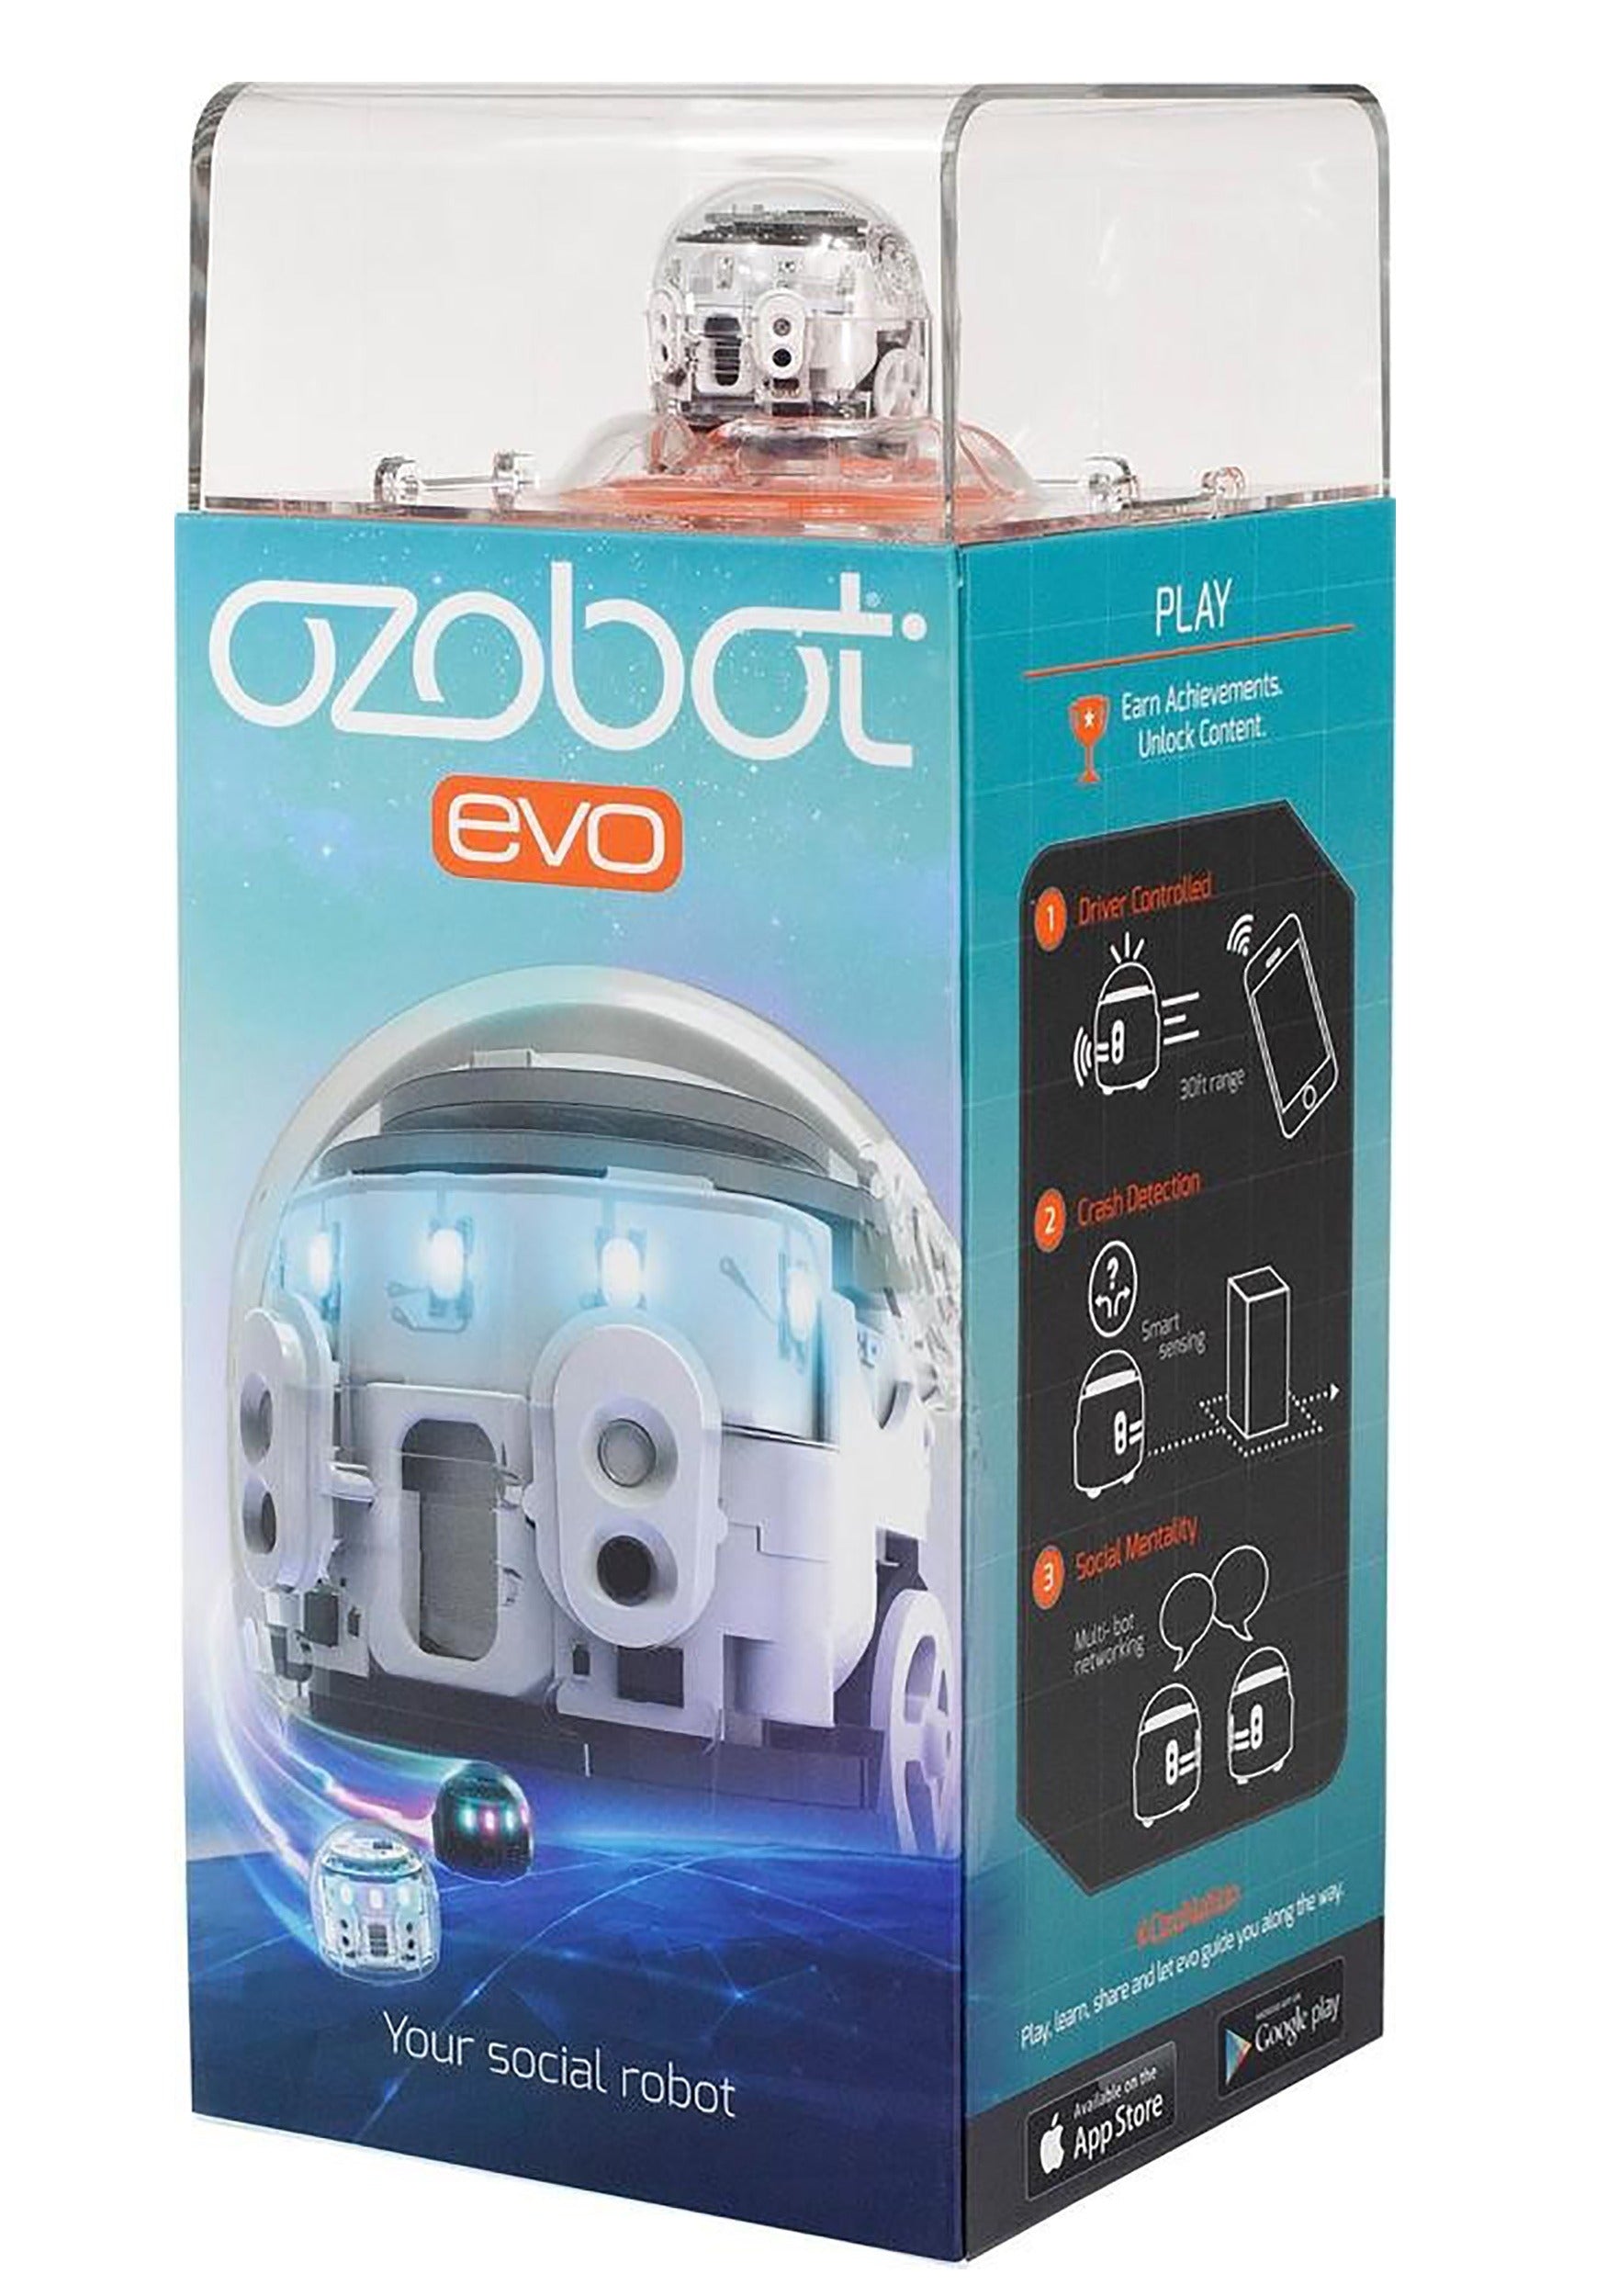 Evo by Ozobot - Apps on Google Play